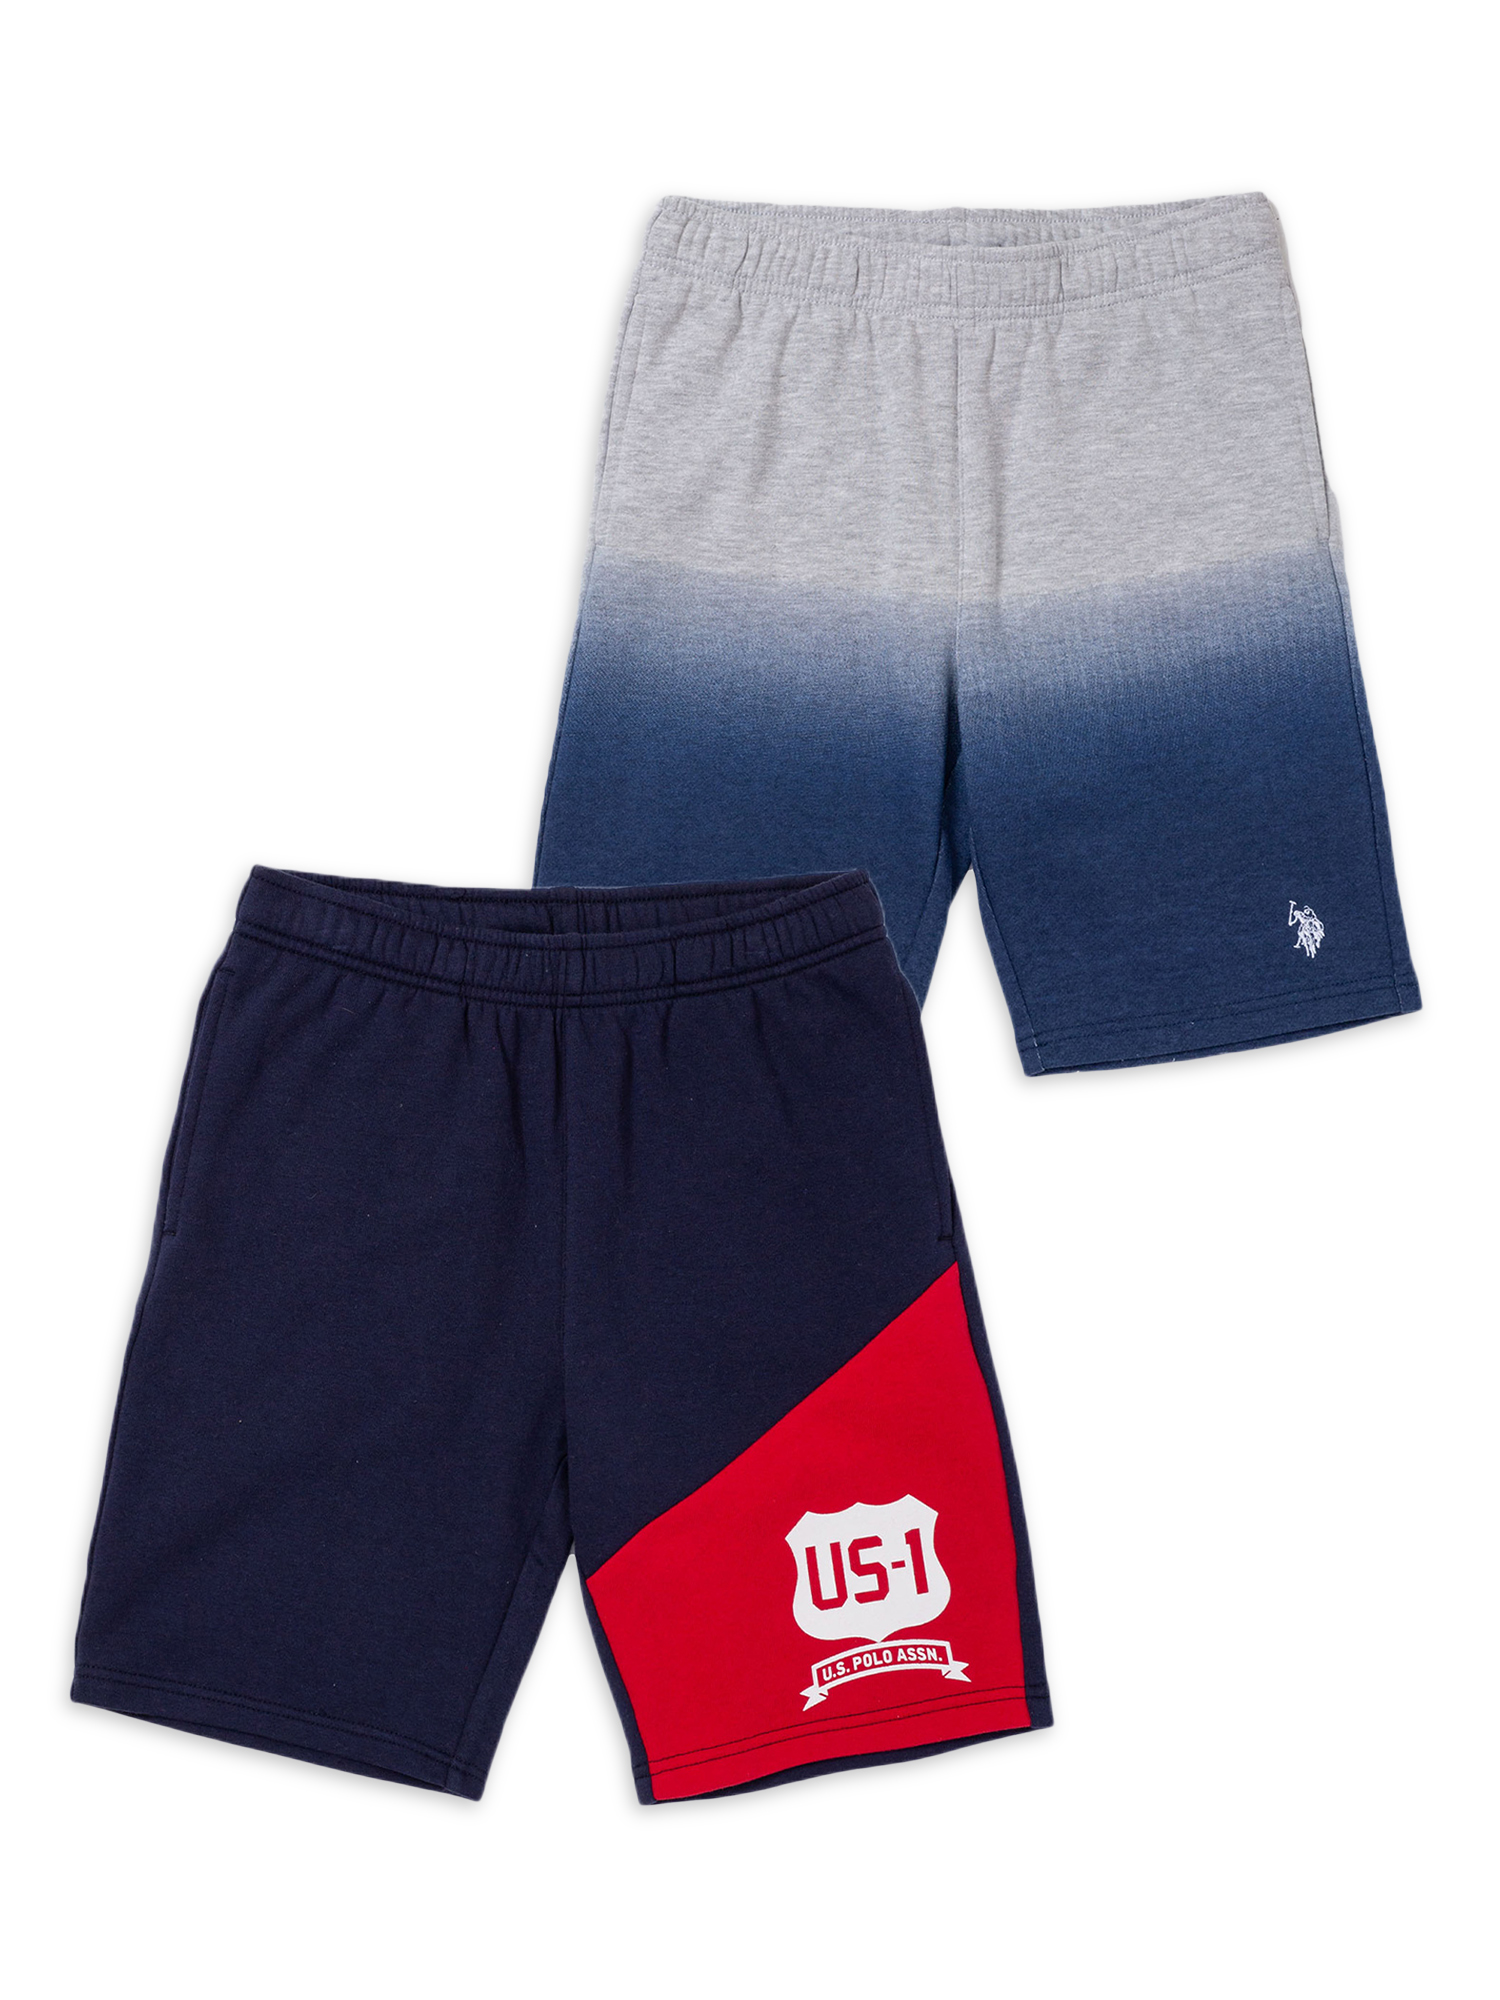 U.S Polo Assn. Performance Fleece 2-Pack Shorts, Sizes 4-18 - image 1 of 4